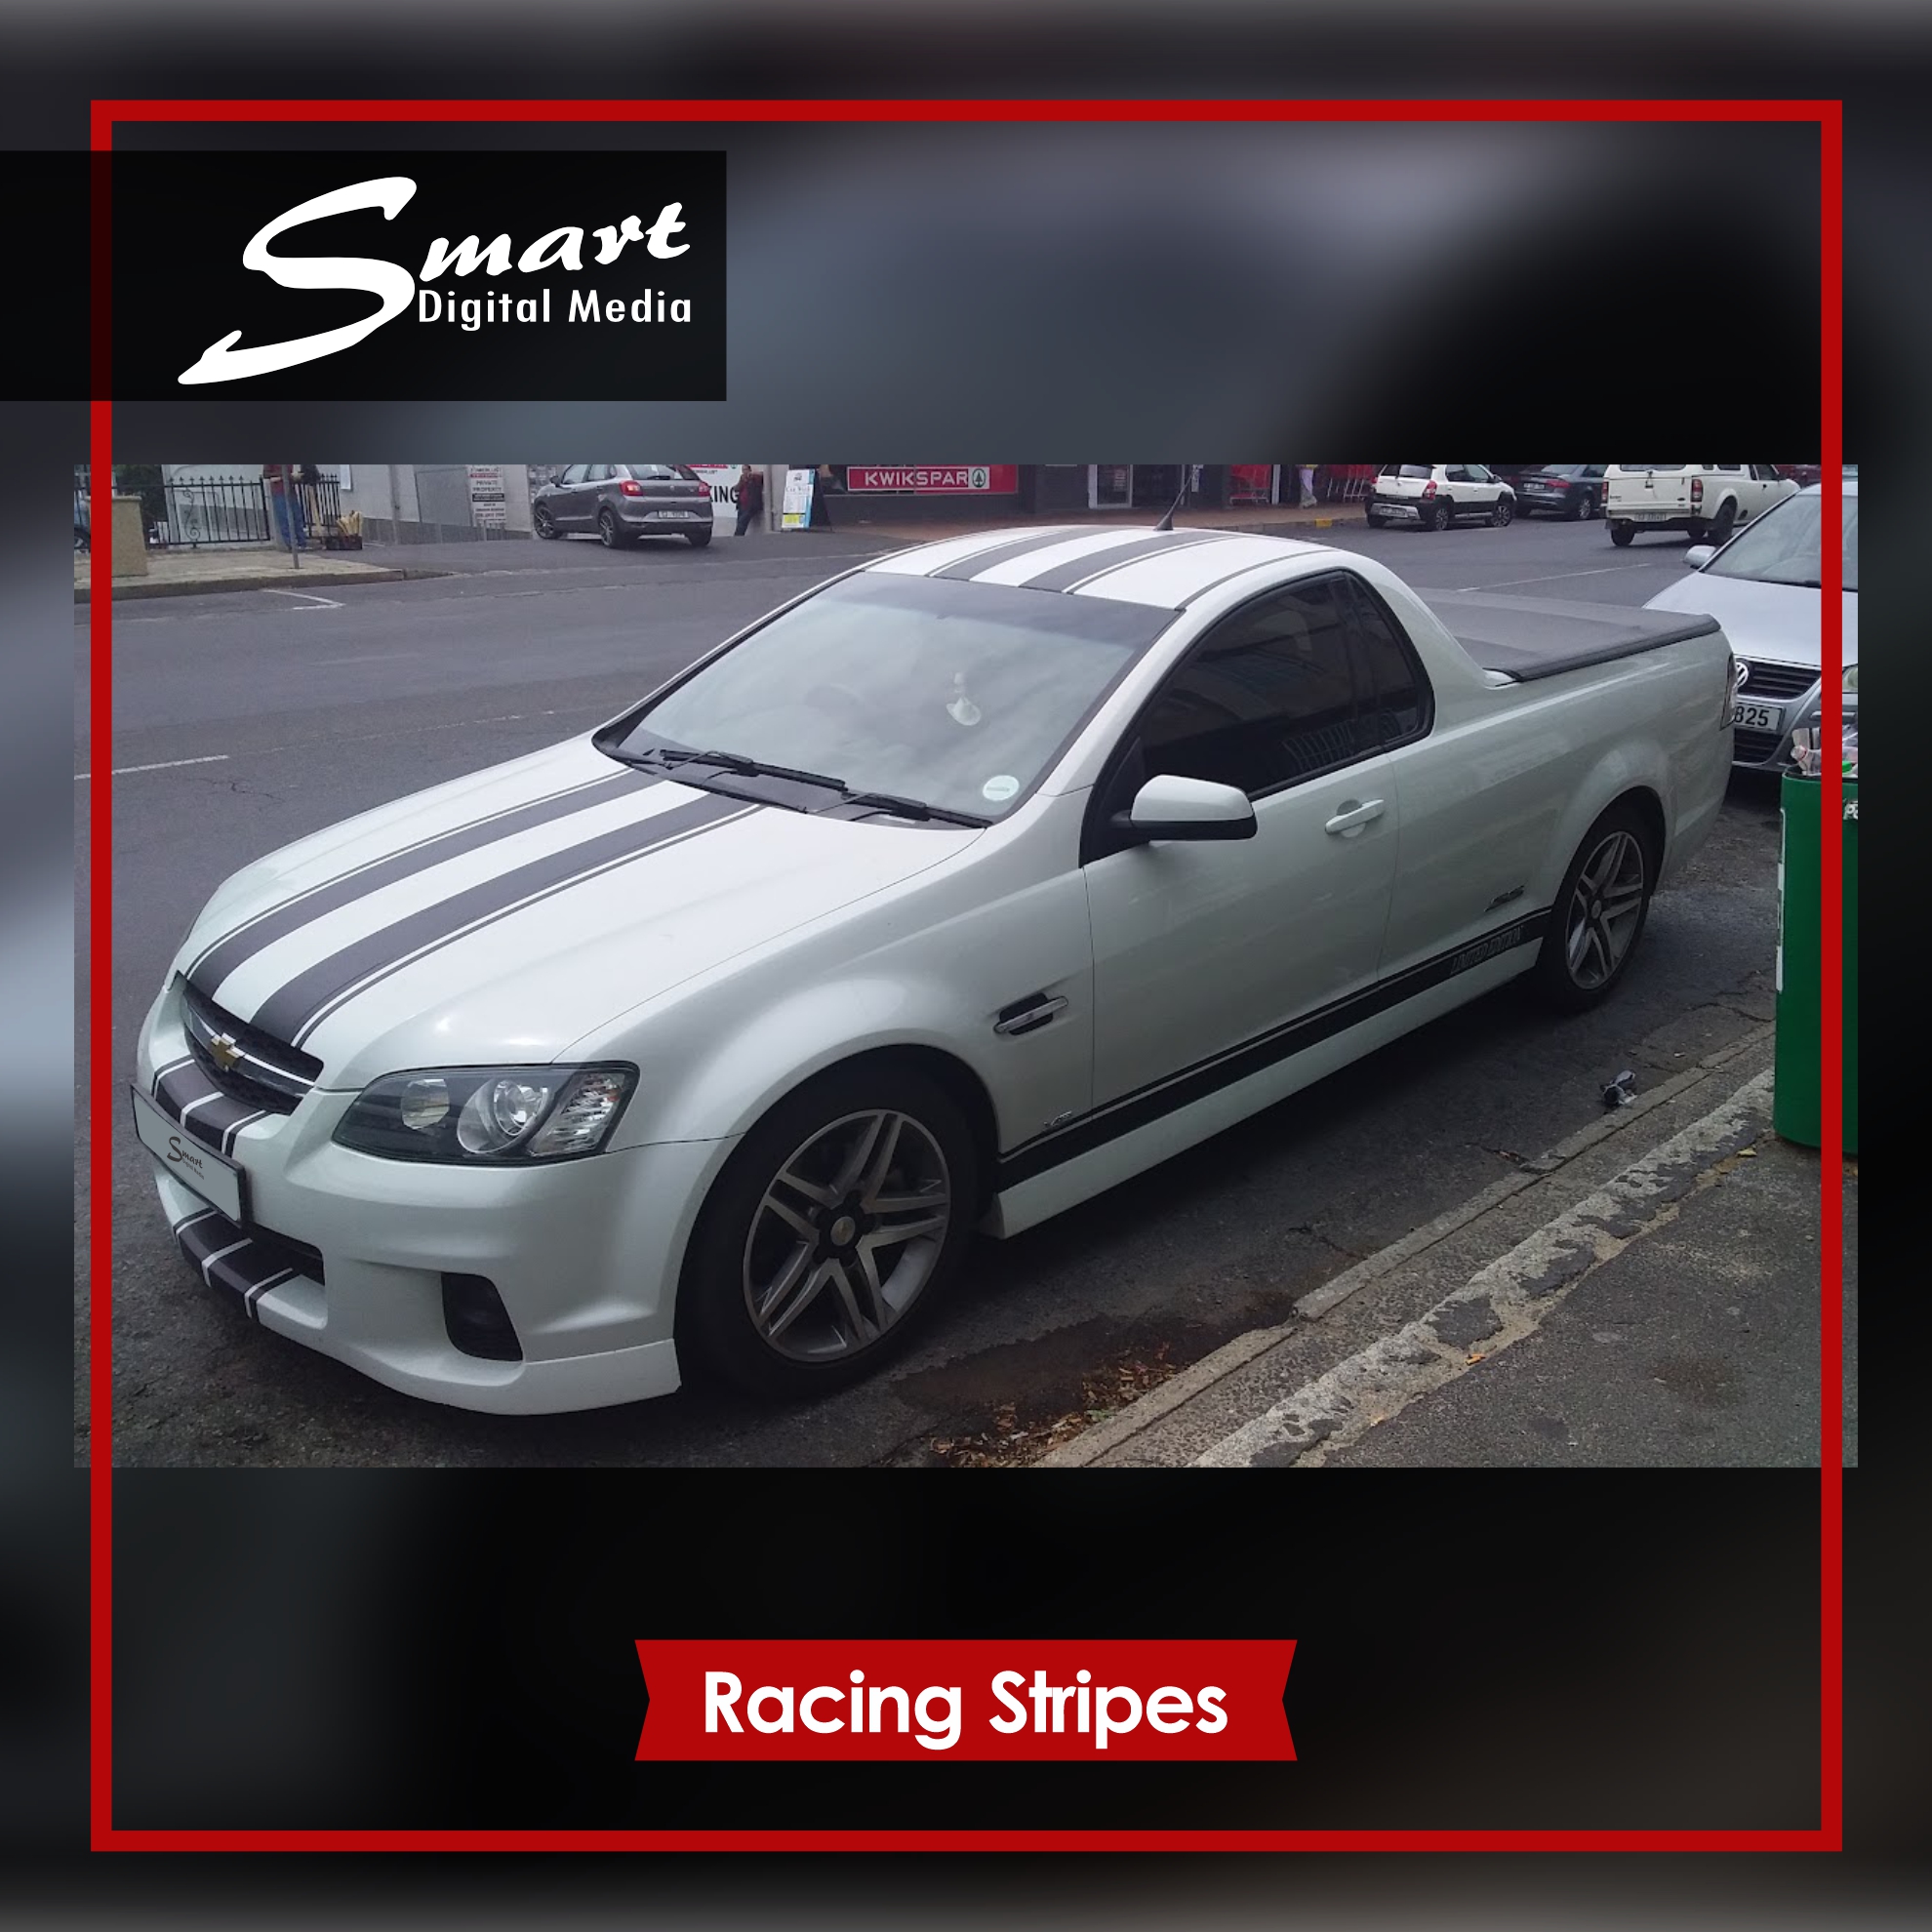 Silver Chevrolet S.S with black racing stripes standing on side of road